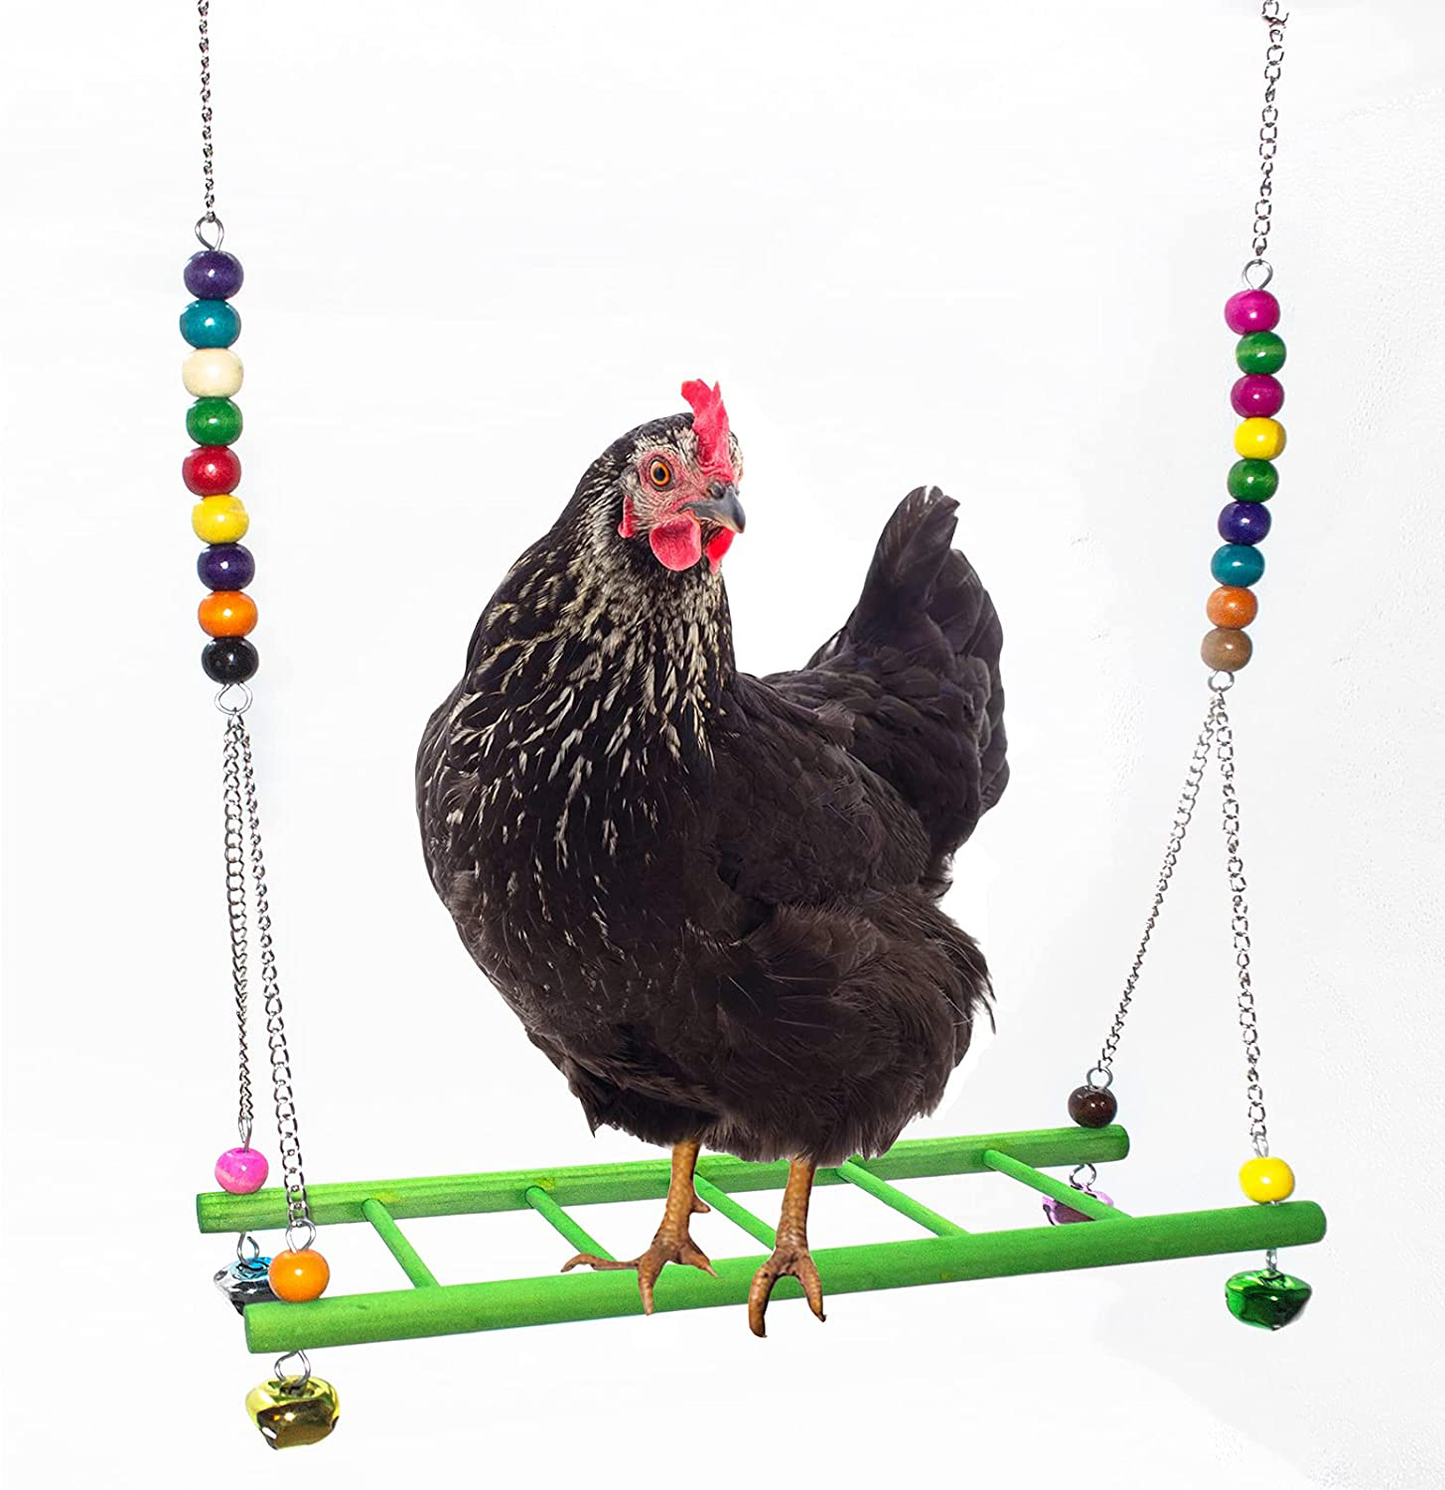 Duvindd Chicken Toys Coop Chicken Swing Toy for Hens Solid Wooden Chicken Perch Roosting Bar Stand Chicken Coop Accessories for Birds Poultry Rooster Chicks Animals & Pet Supplies > Pet Supplies > Bird Supplies > Bird Ladders & Perches DuvinDD Chicken swing  